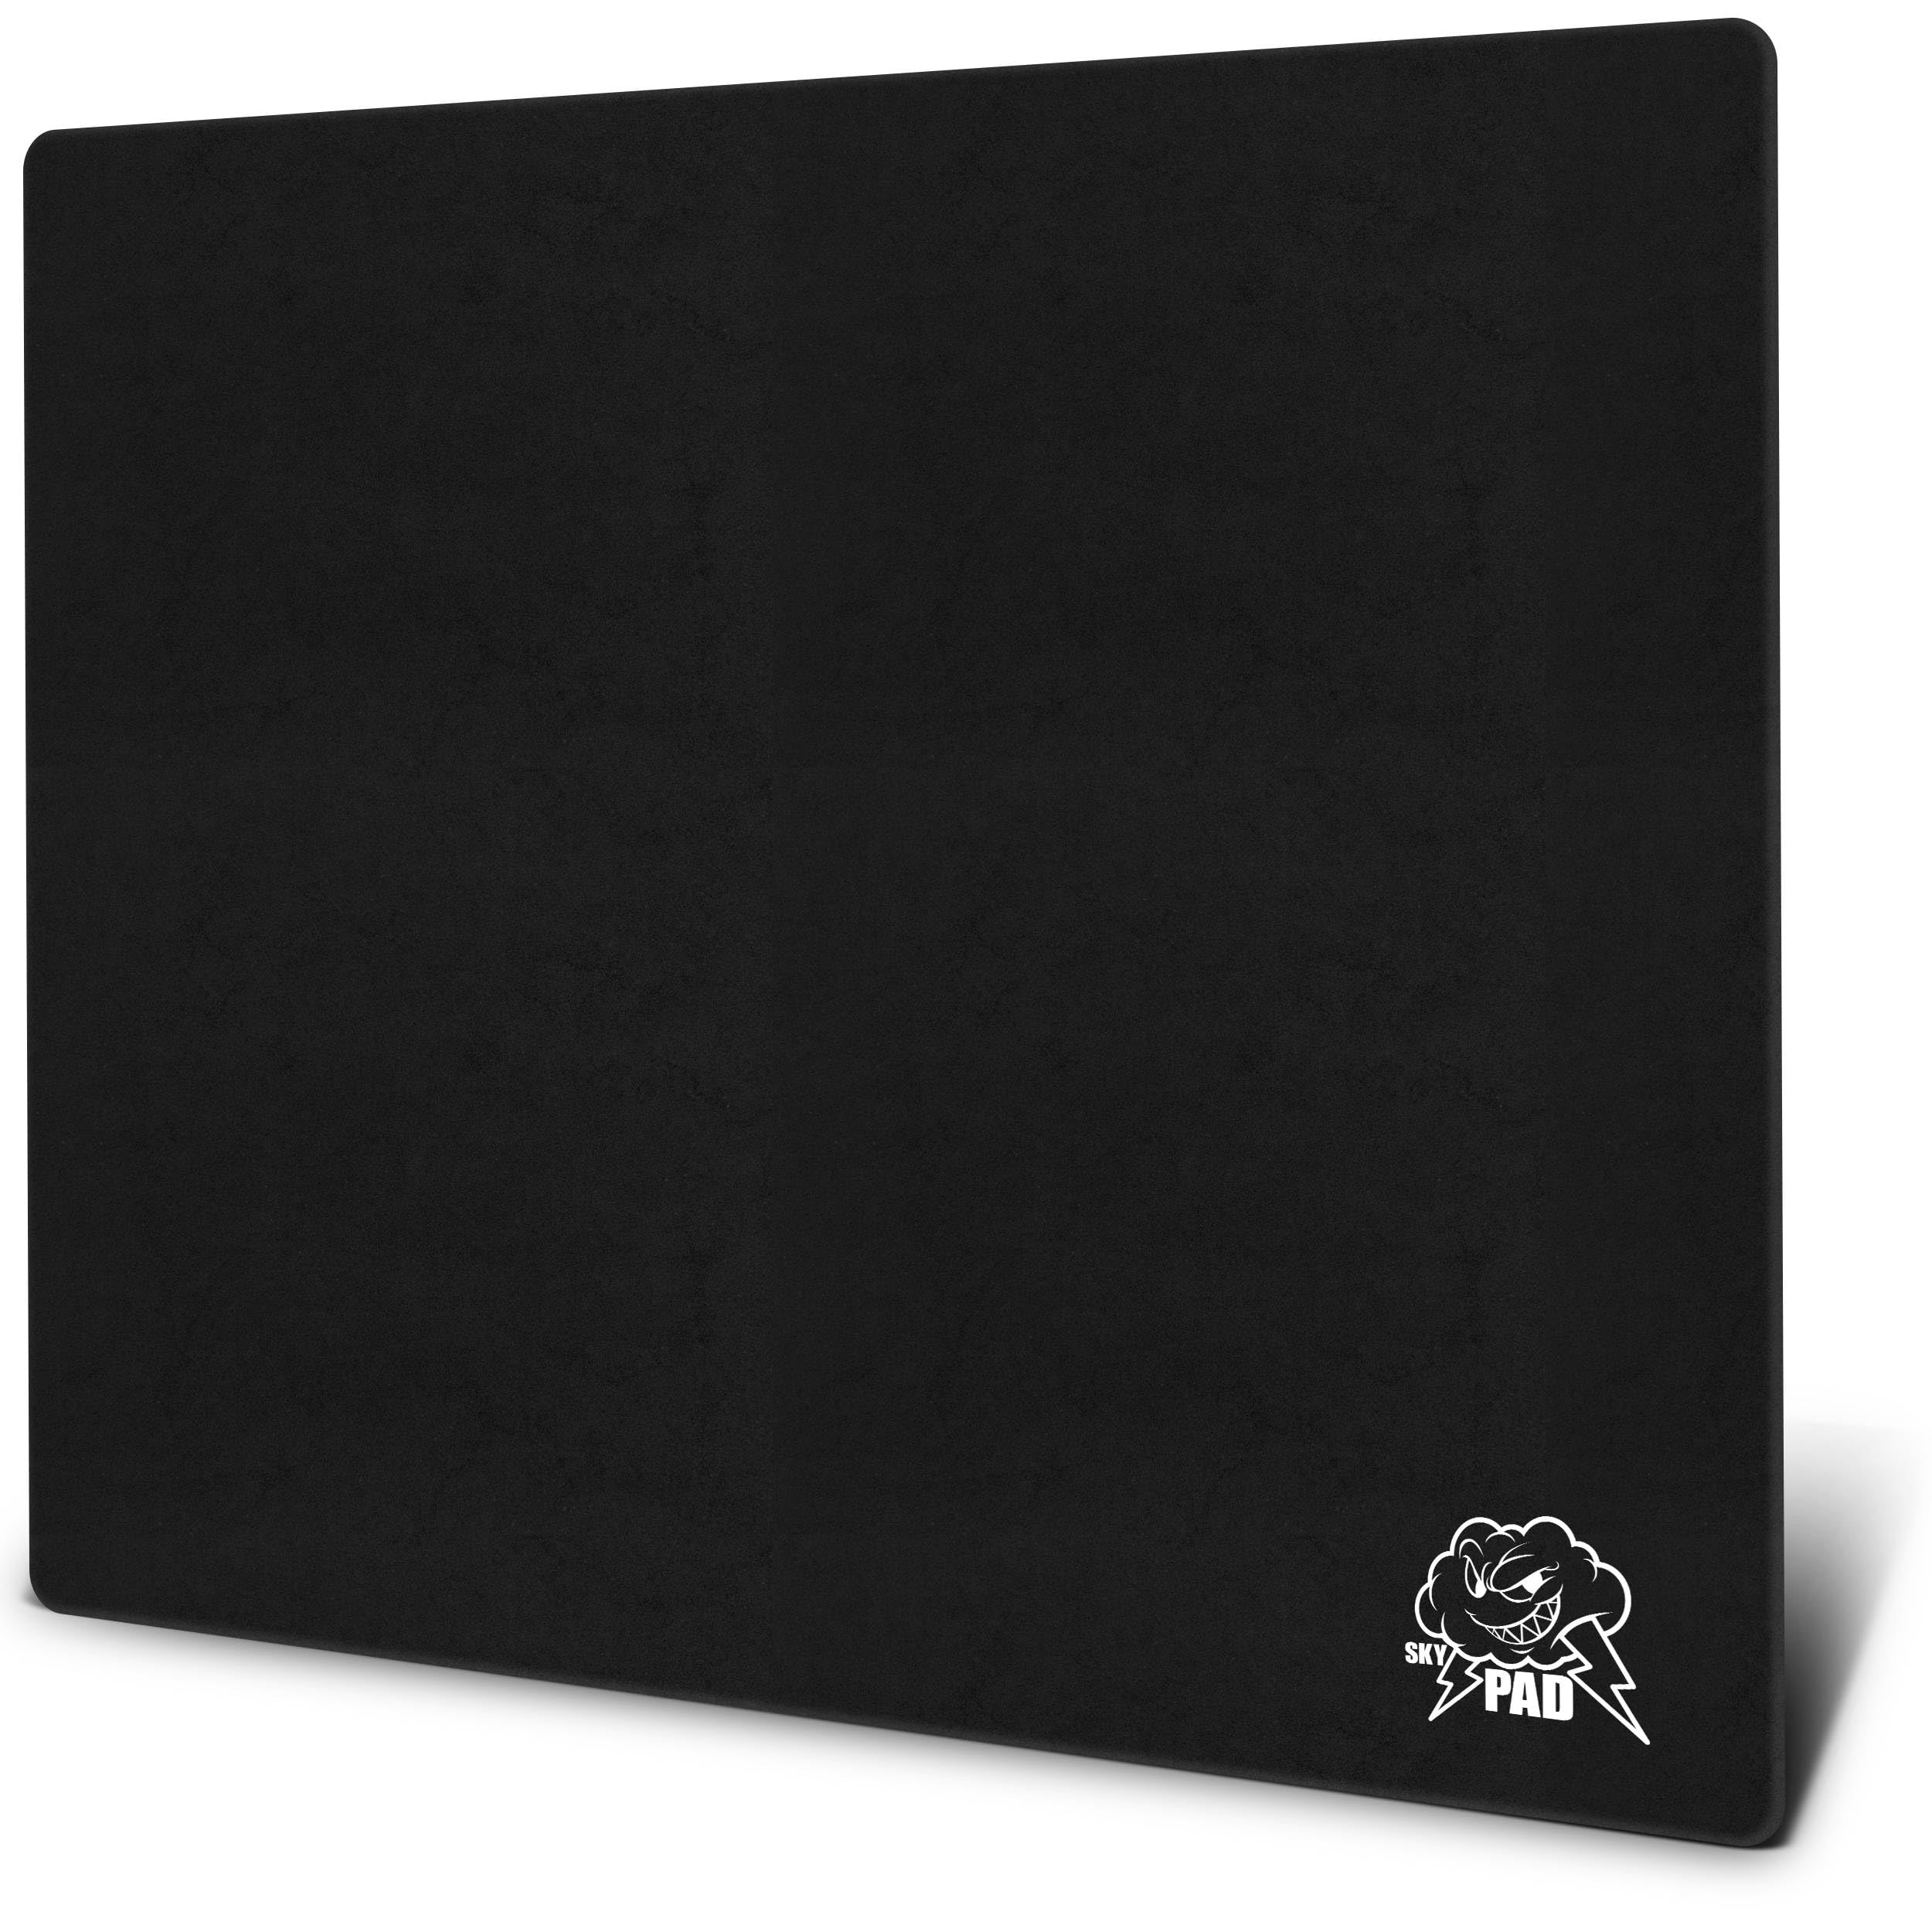 Ensure that you are using a suitable mouse pad on a flat, stable surface.
Clean the mouse pad surface from any dust or debris that might affect the mouse's movement.